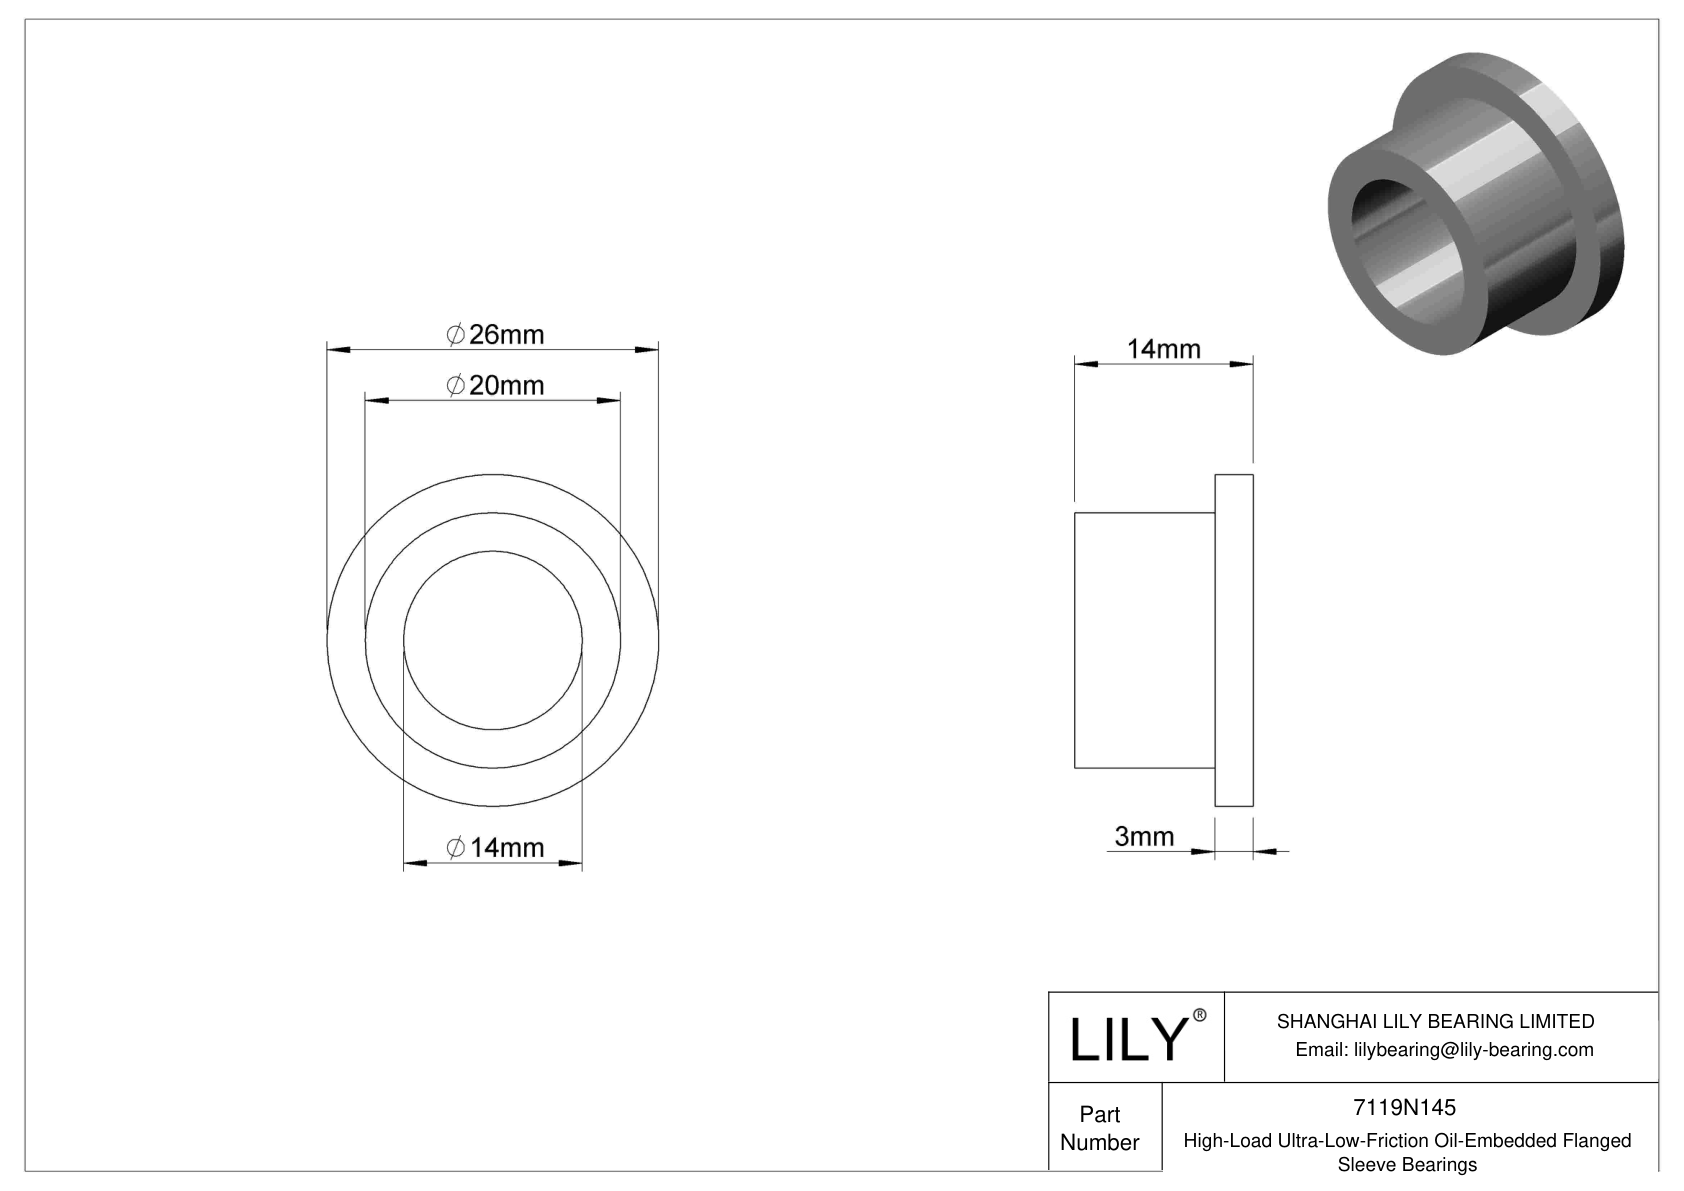 HBBJNBEF High-Load Ultra-Low-Friction Oil-Embedded Flanged Sleeve Bearings cad drawing